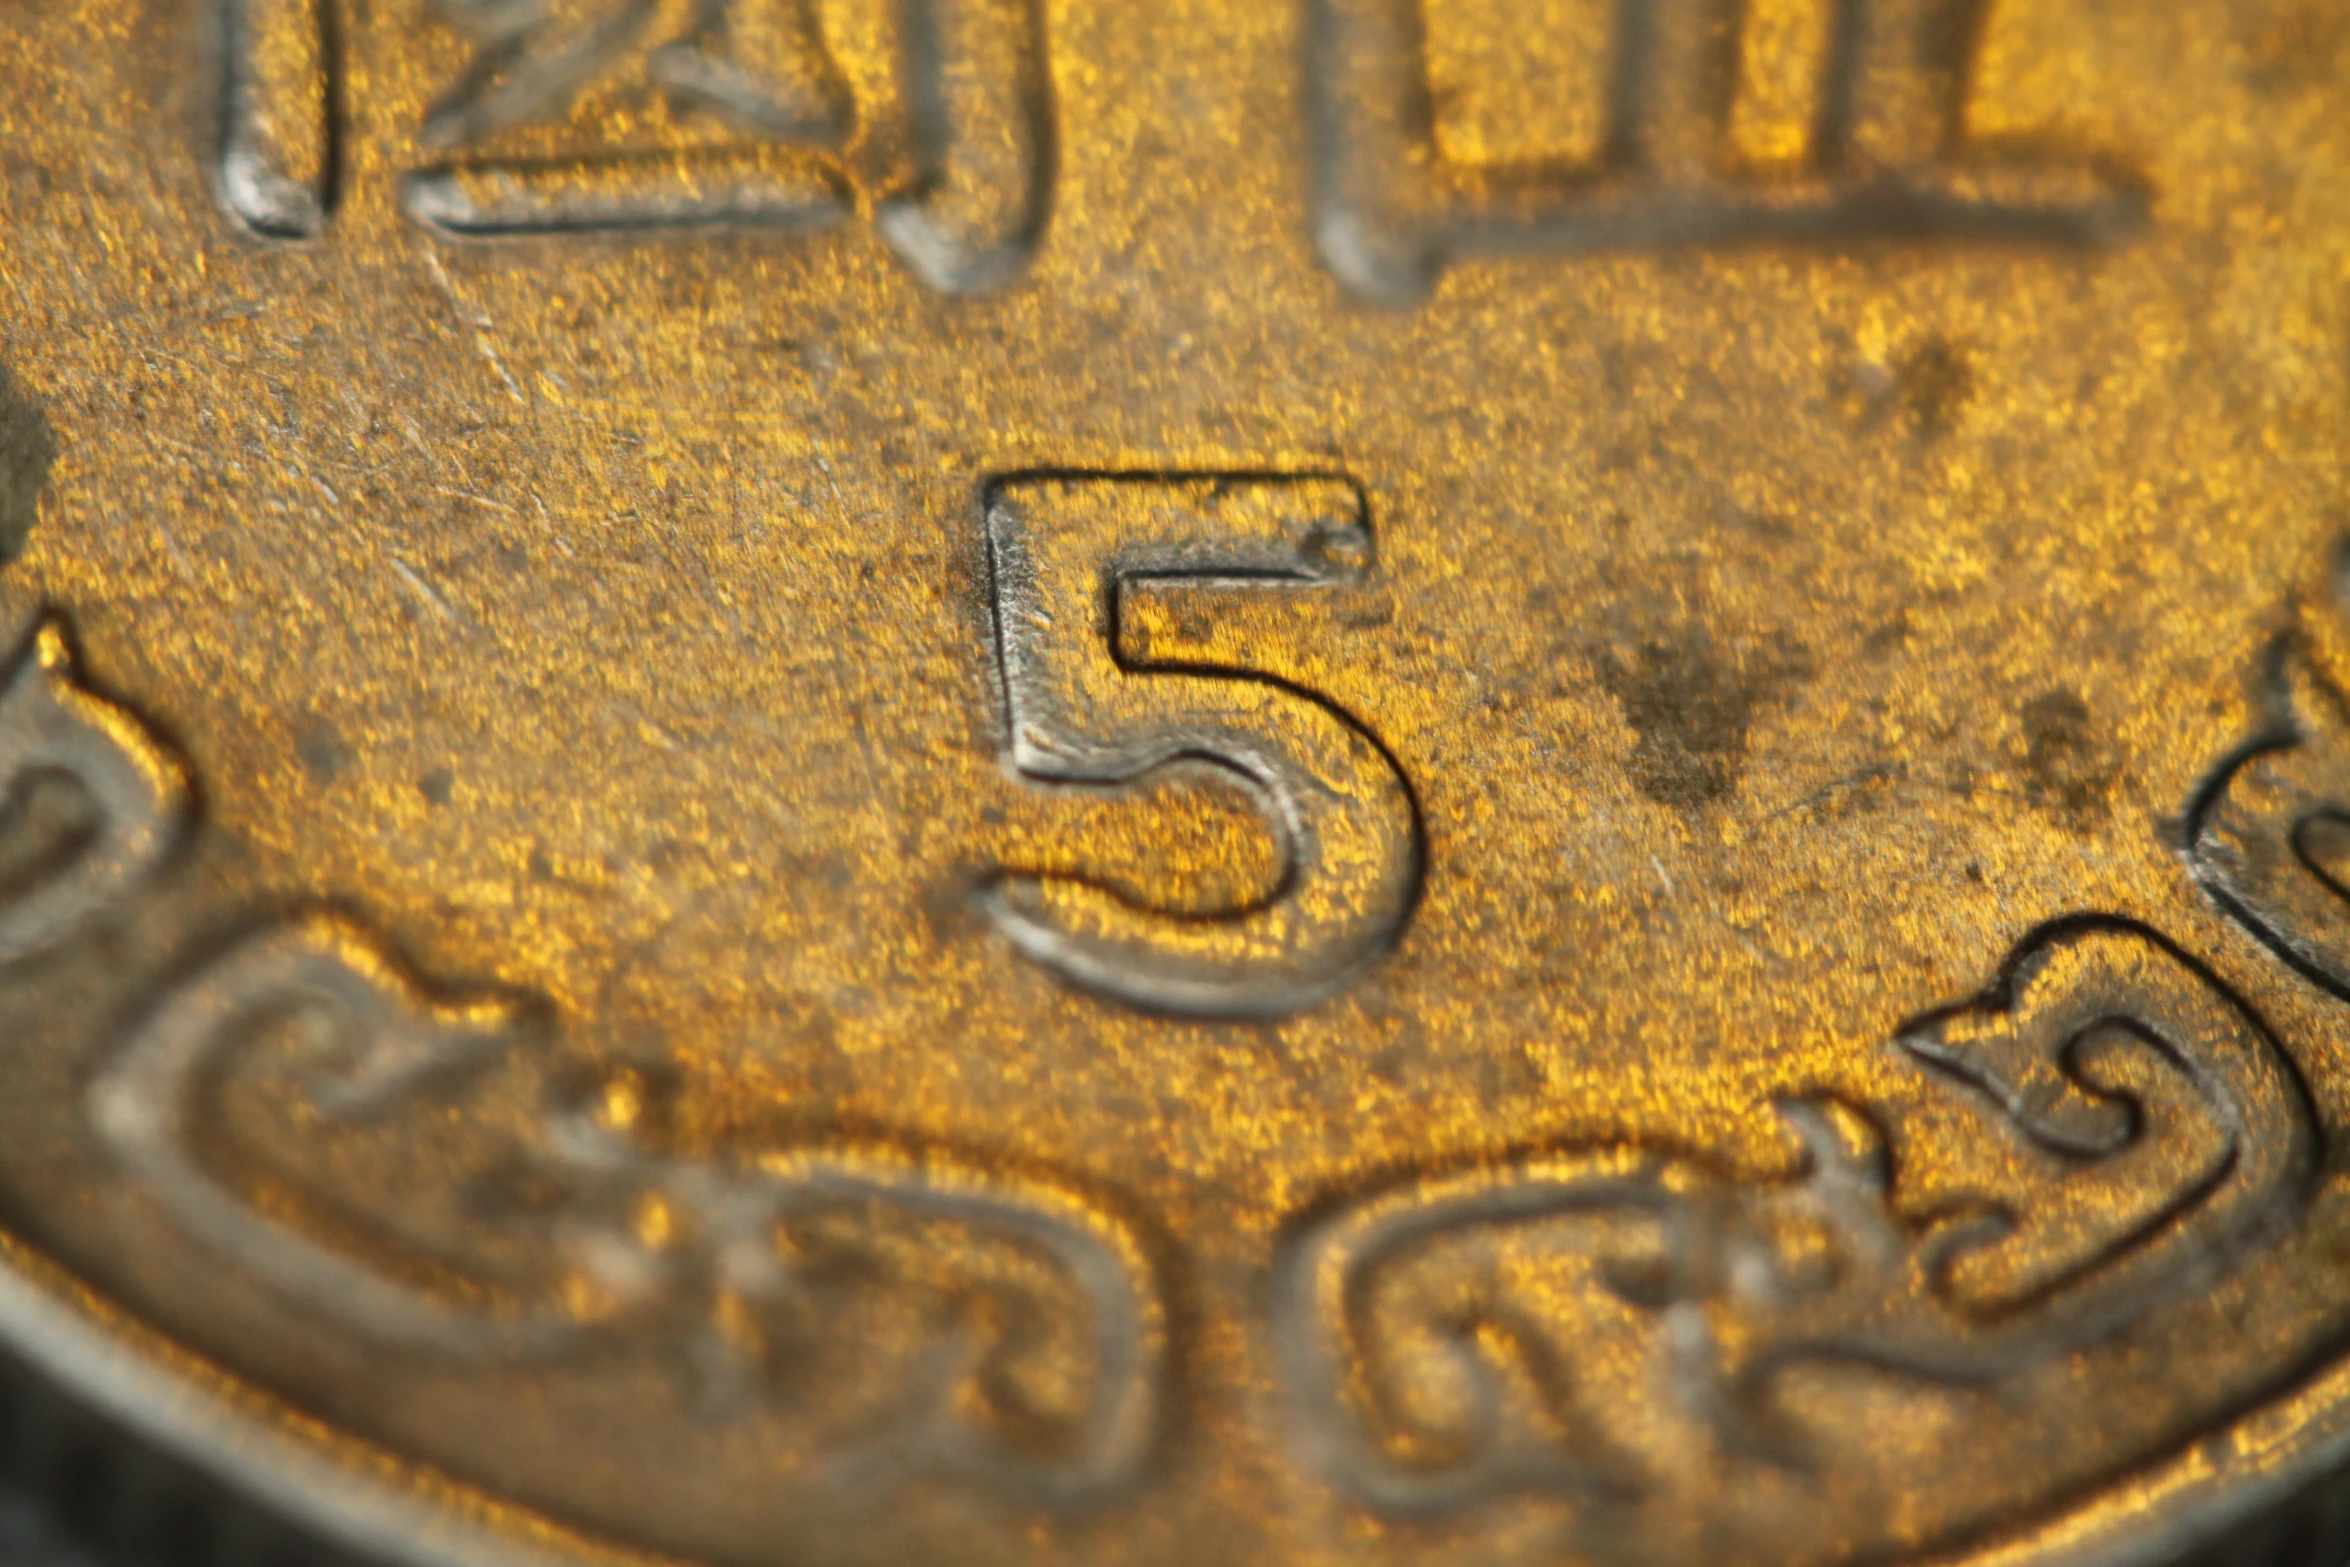 a close up image of a five cents coin